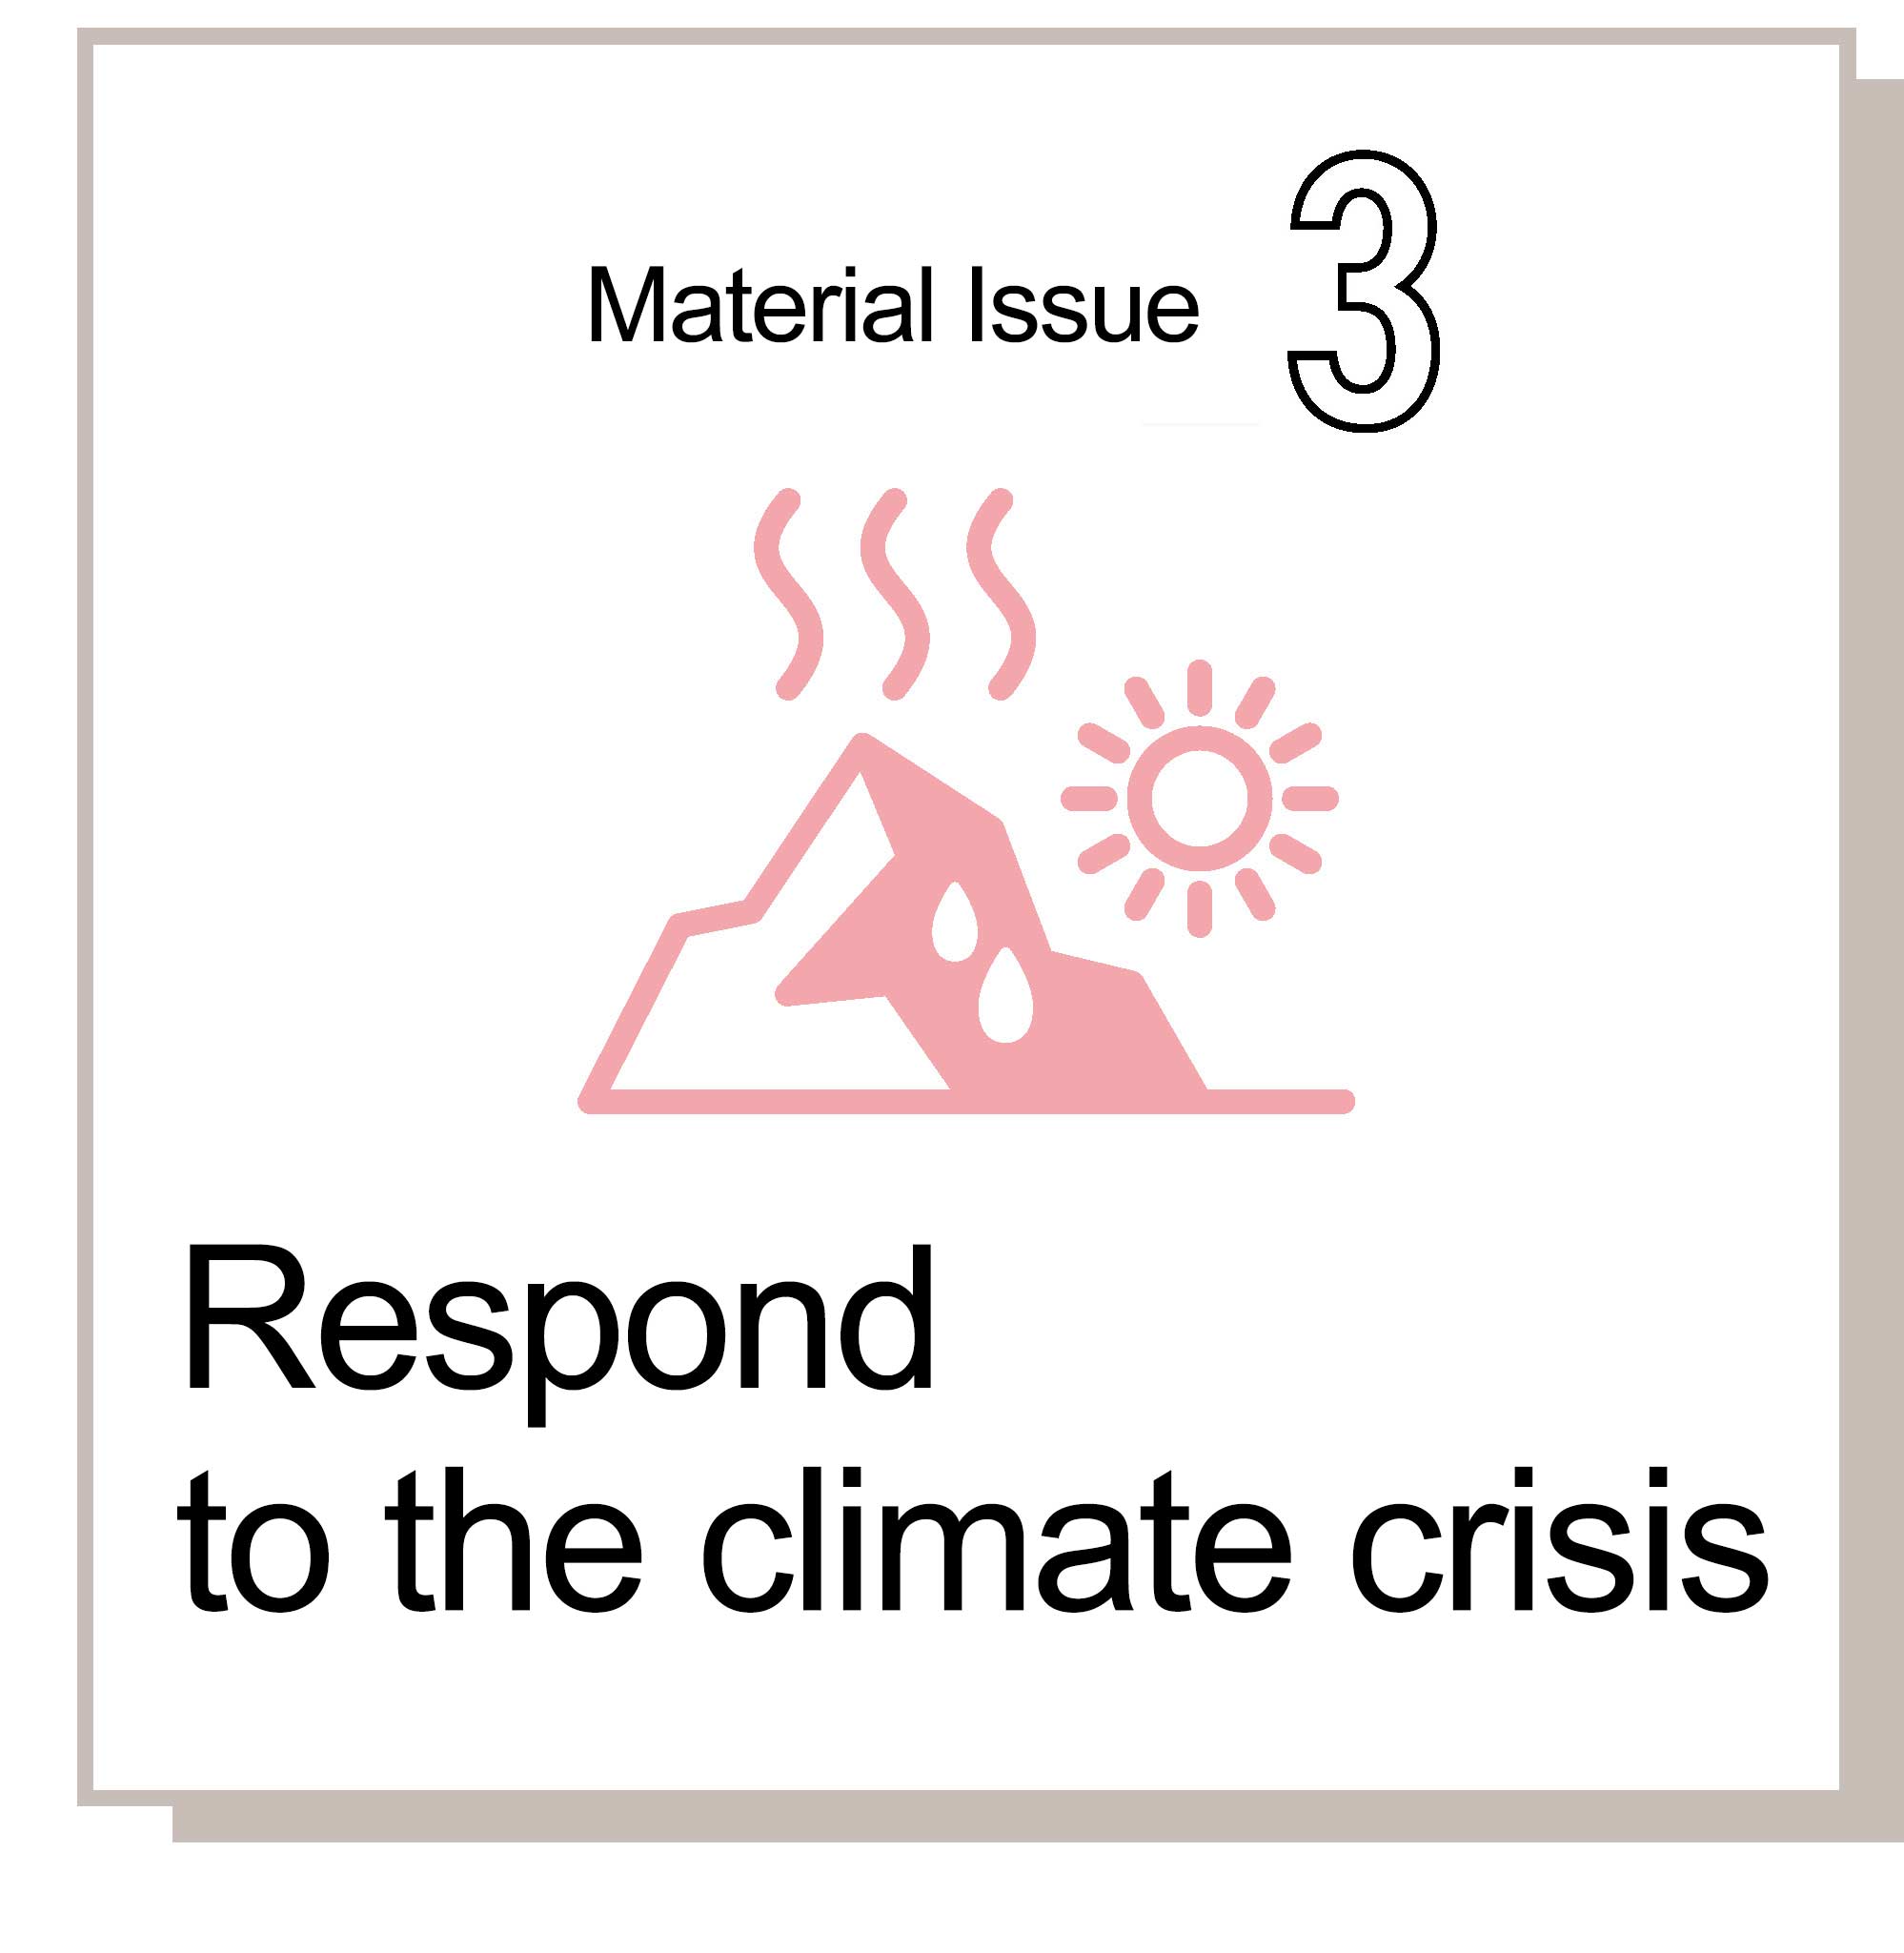 Material Issue 3 Respond to the climate crisis
																			